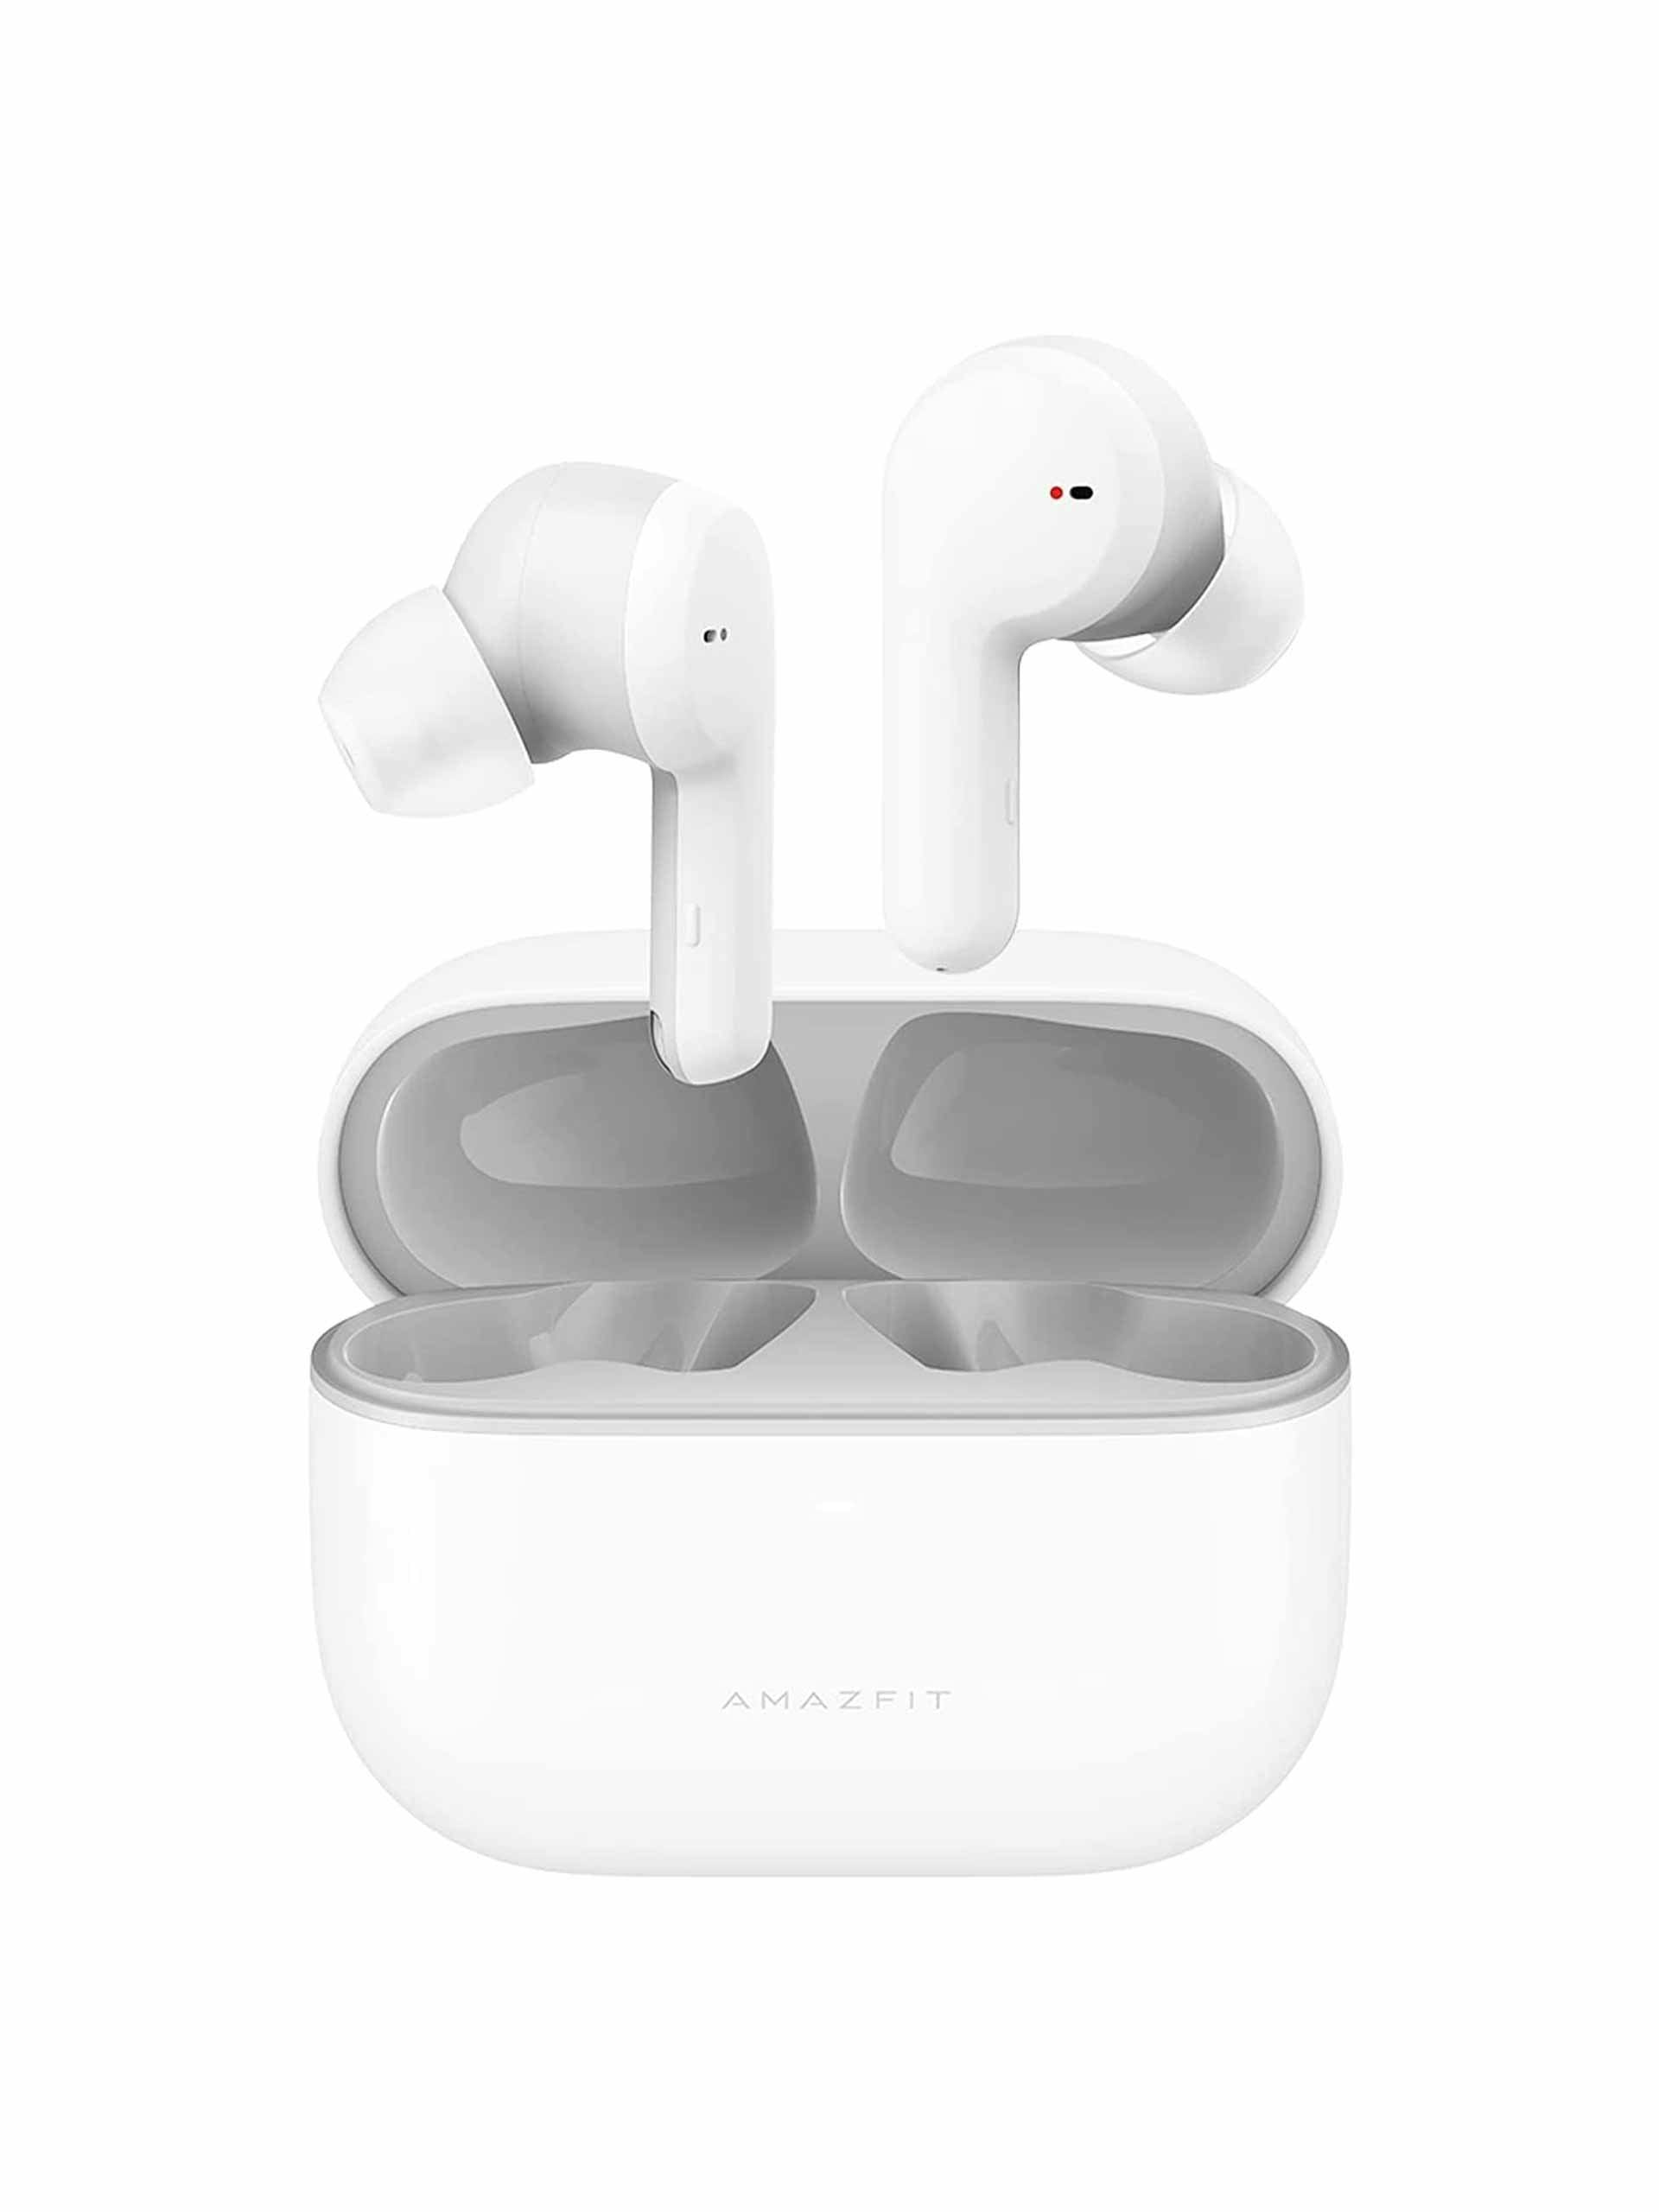 PowerBuds pro active noise cancelling earbuds